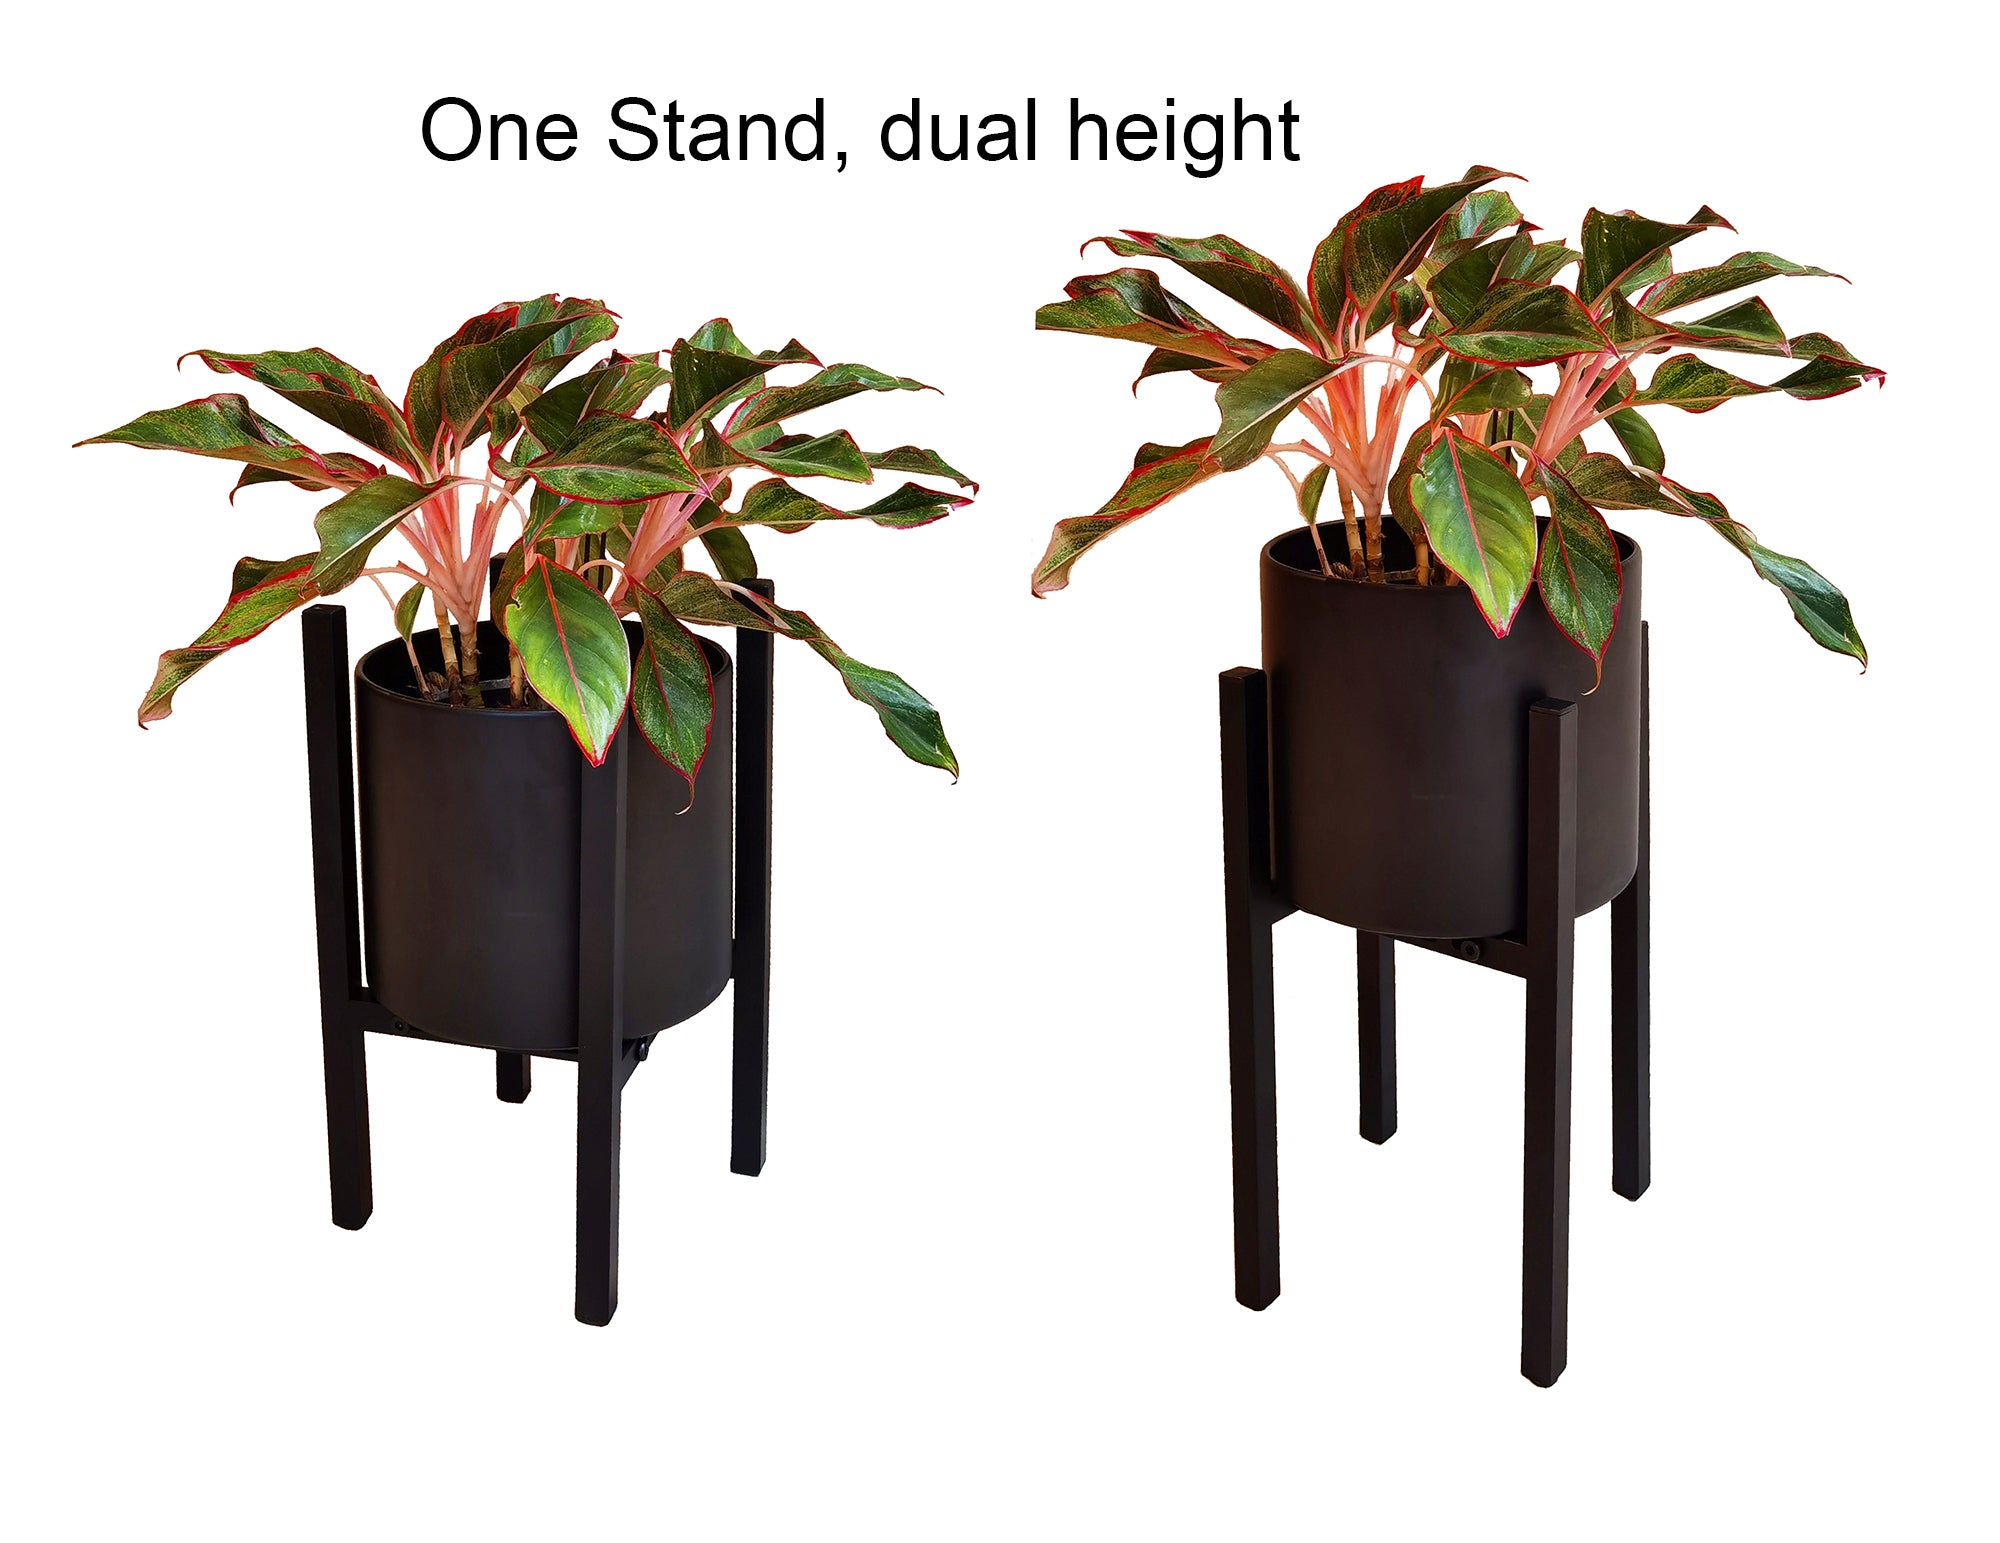 Adjustable Black Metal Plant Stand Dual Height Options Powder Coated Steel Frame